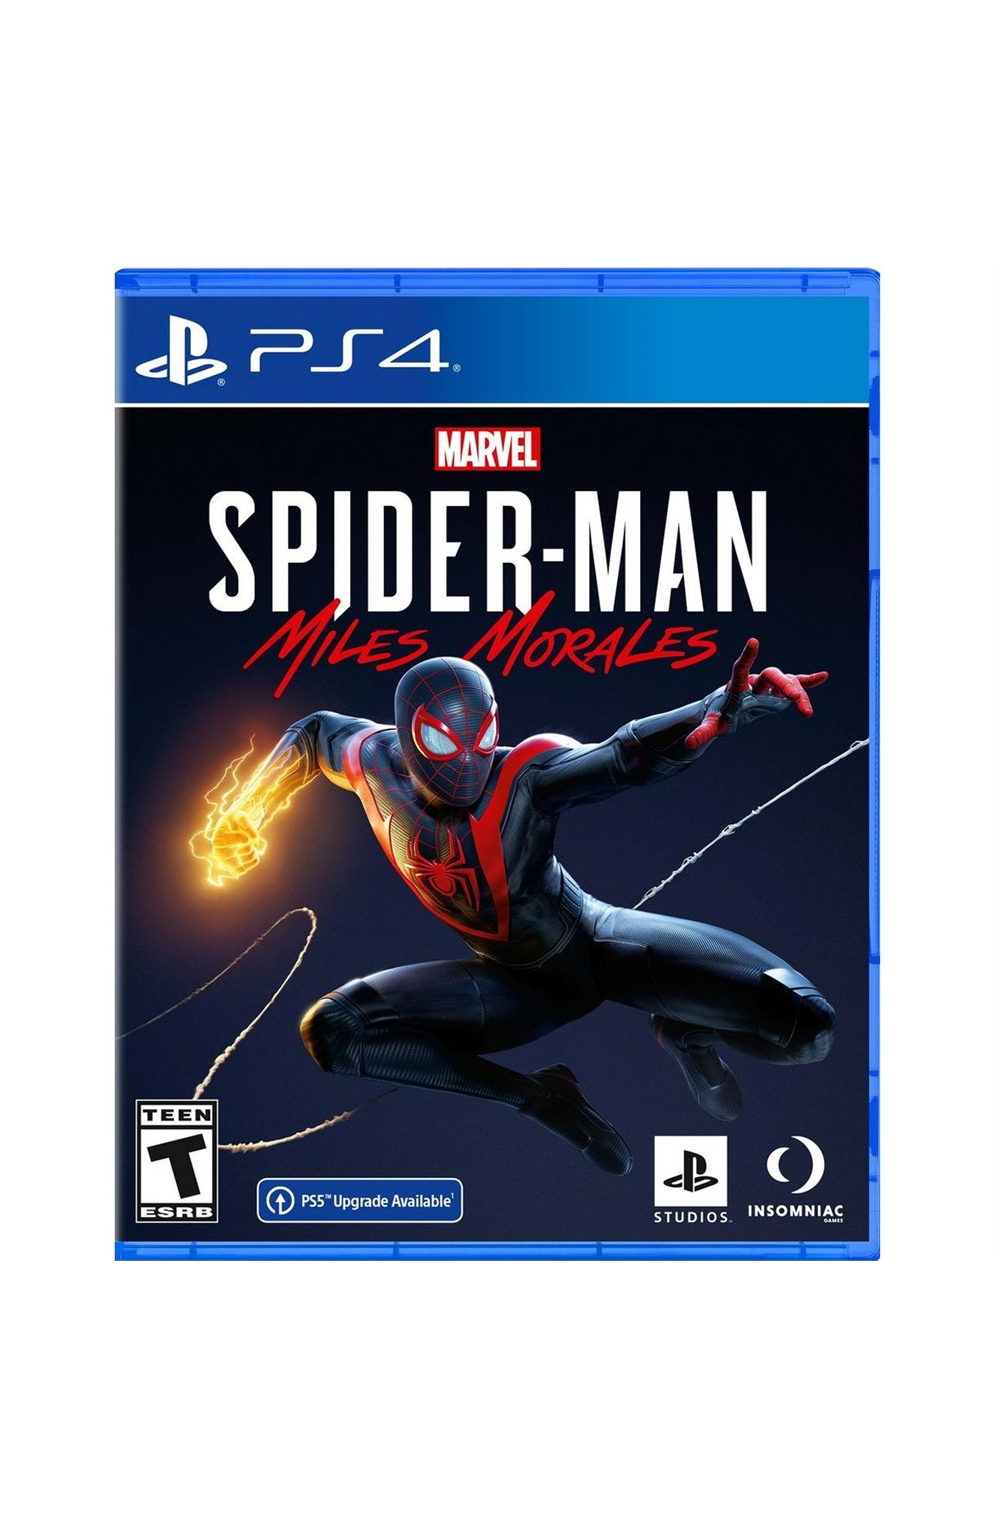 Playstation 4 Ps4 Spider-Man Miles Morales Launch Edition 